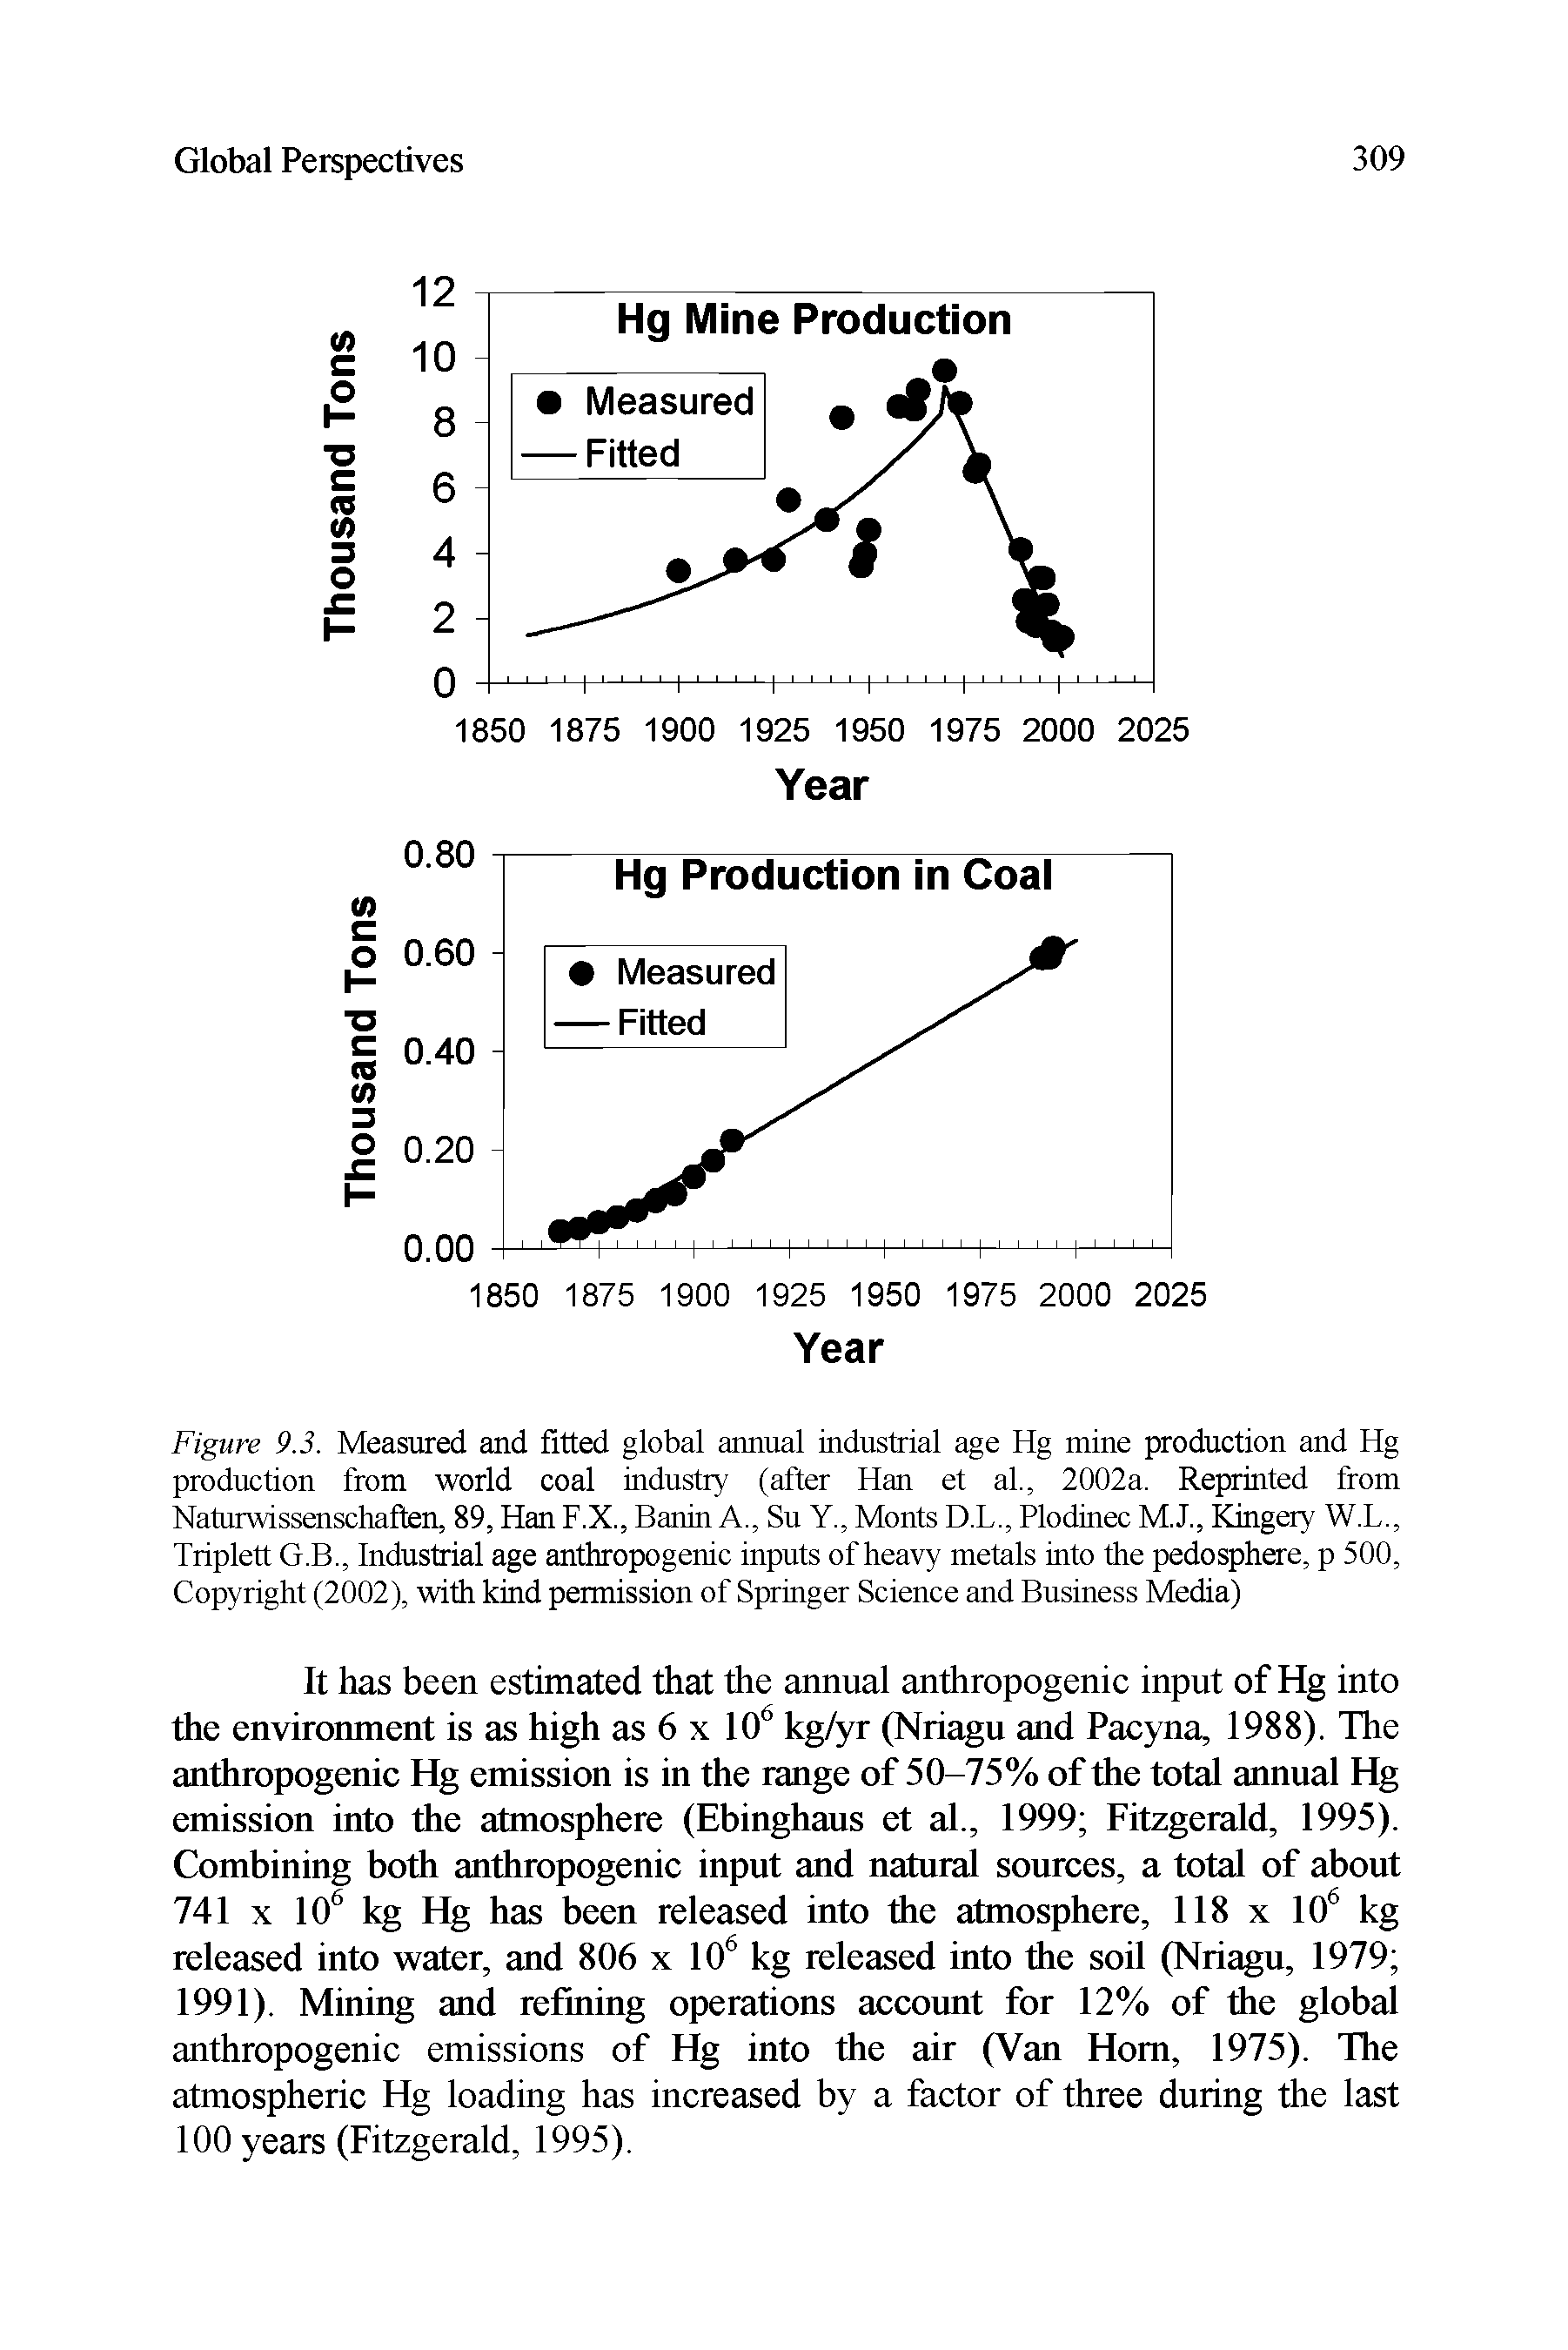 Figure 9.3. Measured and fitted global annual industrial age Hg mine production and Hg production from world coal industry (after Han et al., 2002a. Reprinted from Naturwissenschaften, 89, Han F.X., Banin A., Su Y., Monts D.L., Plodinec M.J., Kingery W.L., Triplett G.B., Industrial age anthropogenic inputs of heavy metals into the pedosphere, p 500, Copyright (2002), with kind permission of Springer Science and Business Media)...